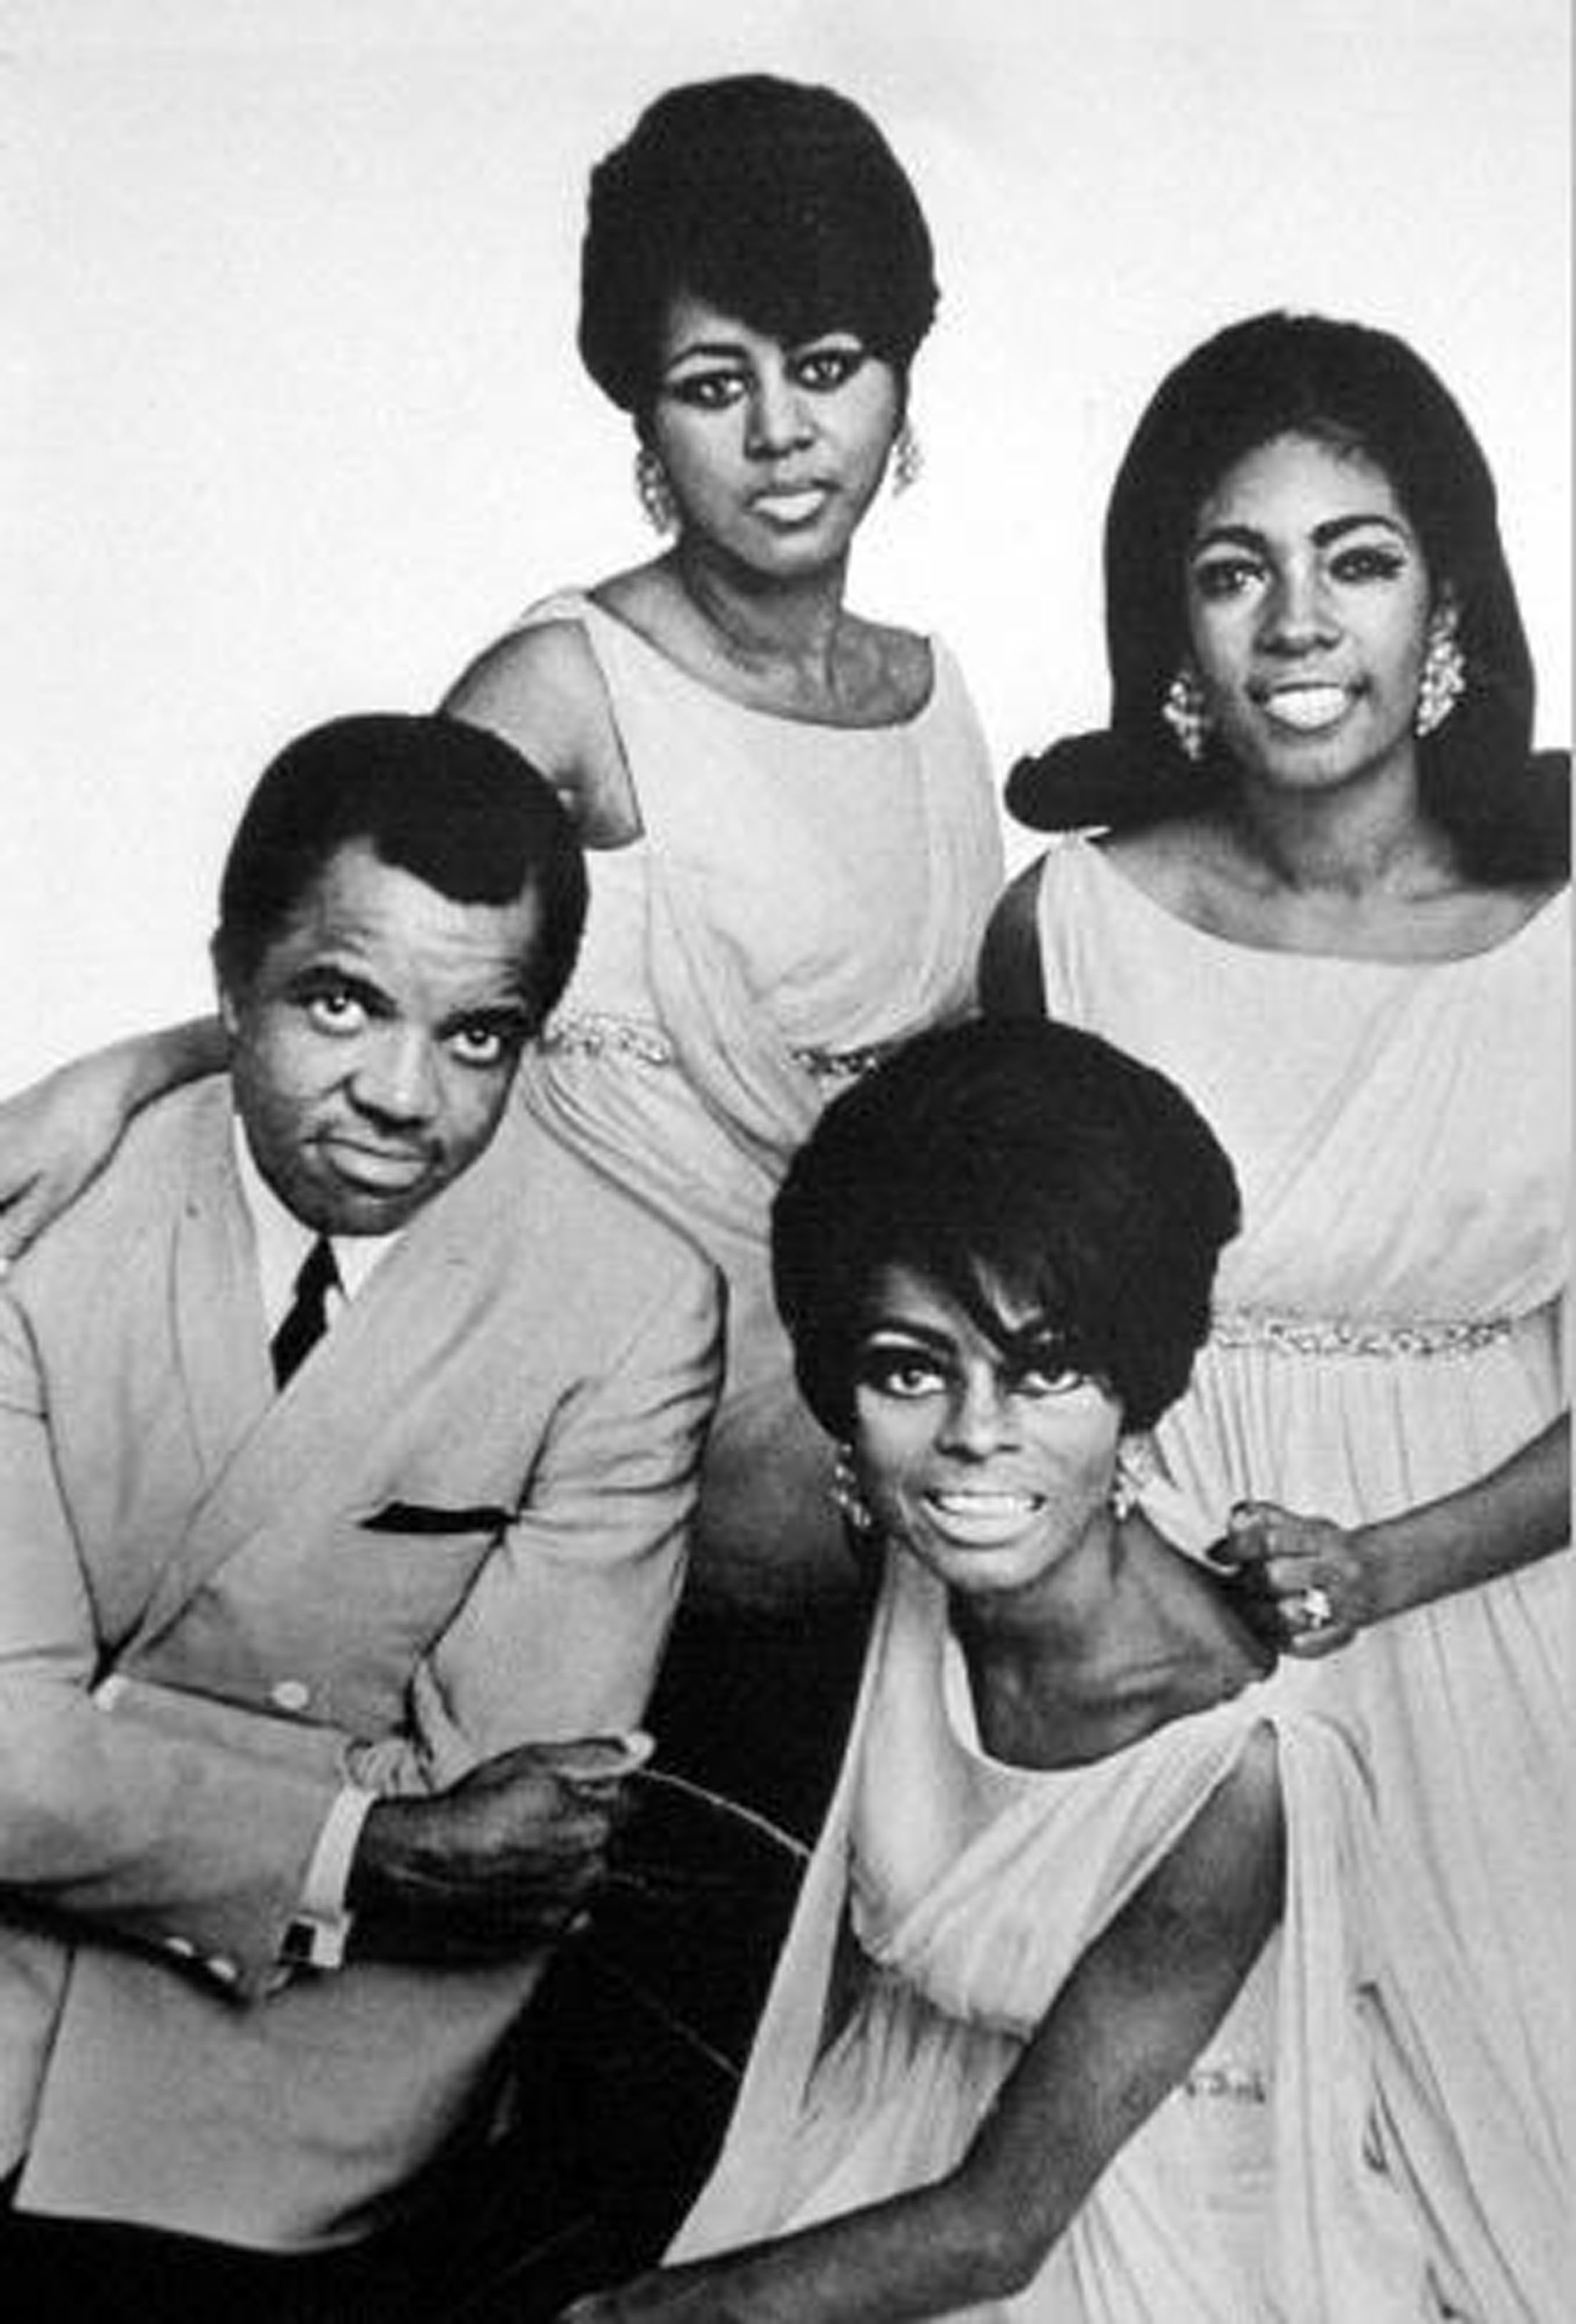 Berry Gordy with Diana Ross and The Supremes smiling for the camera in a black and white photo.